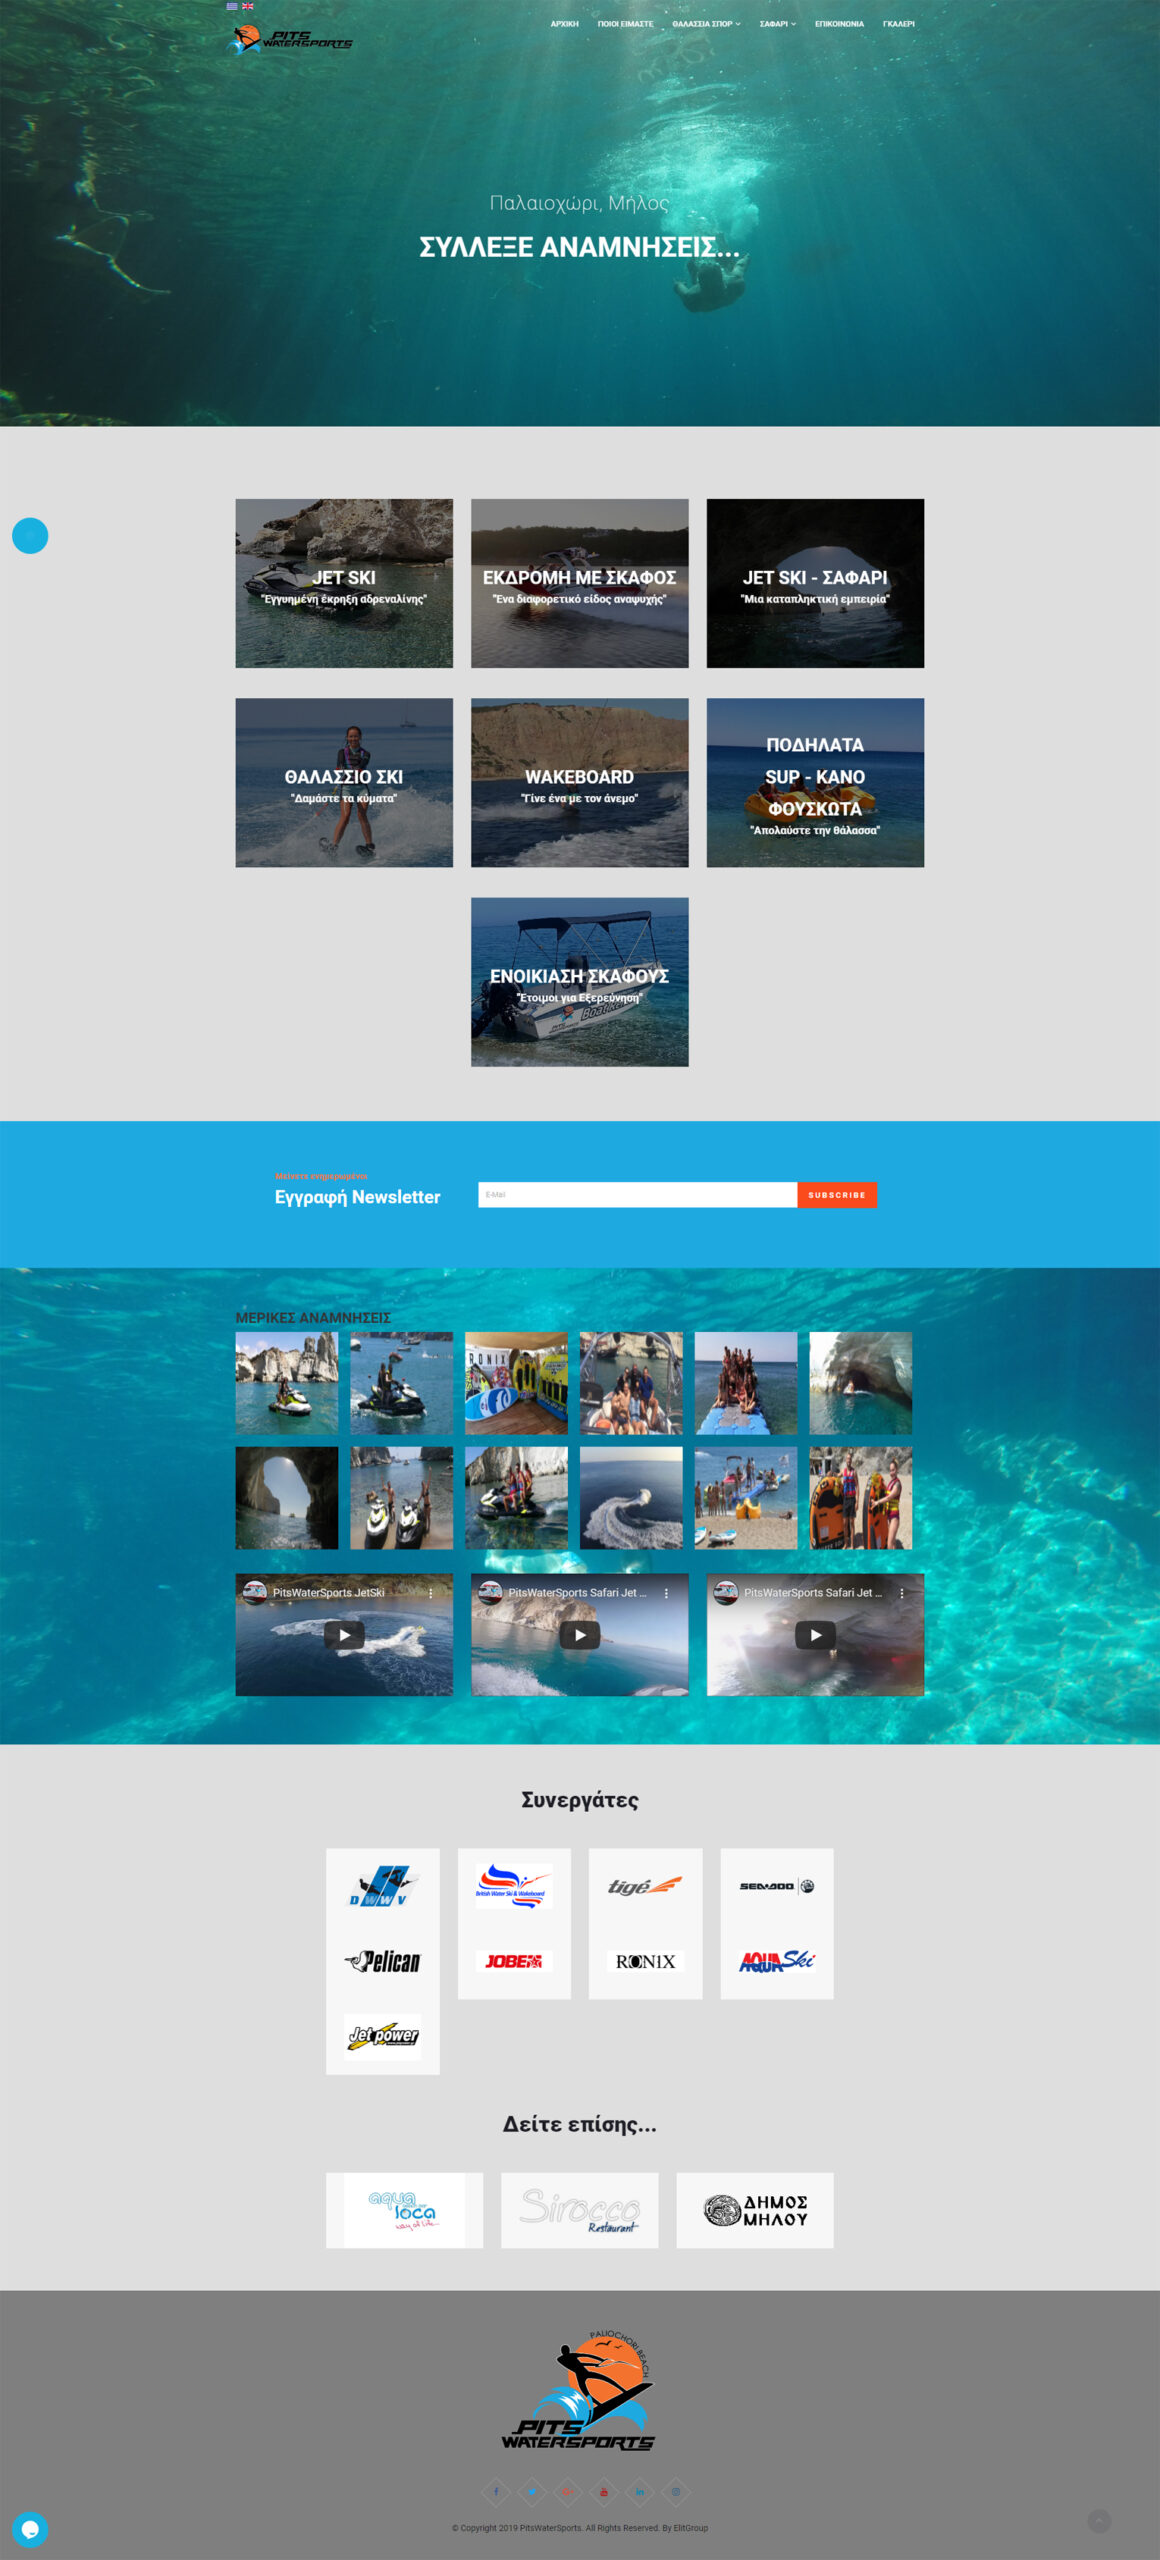 pitswatersports website full page